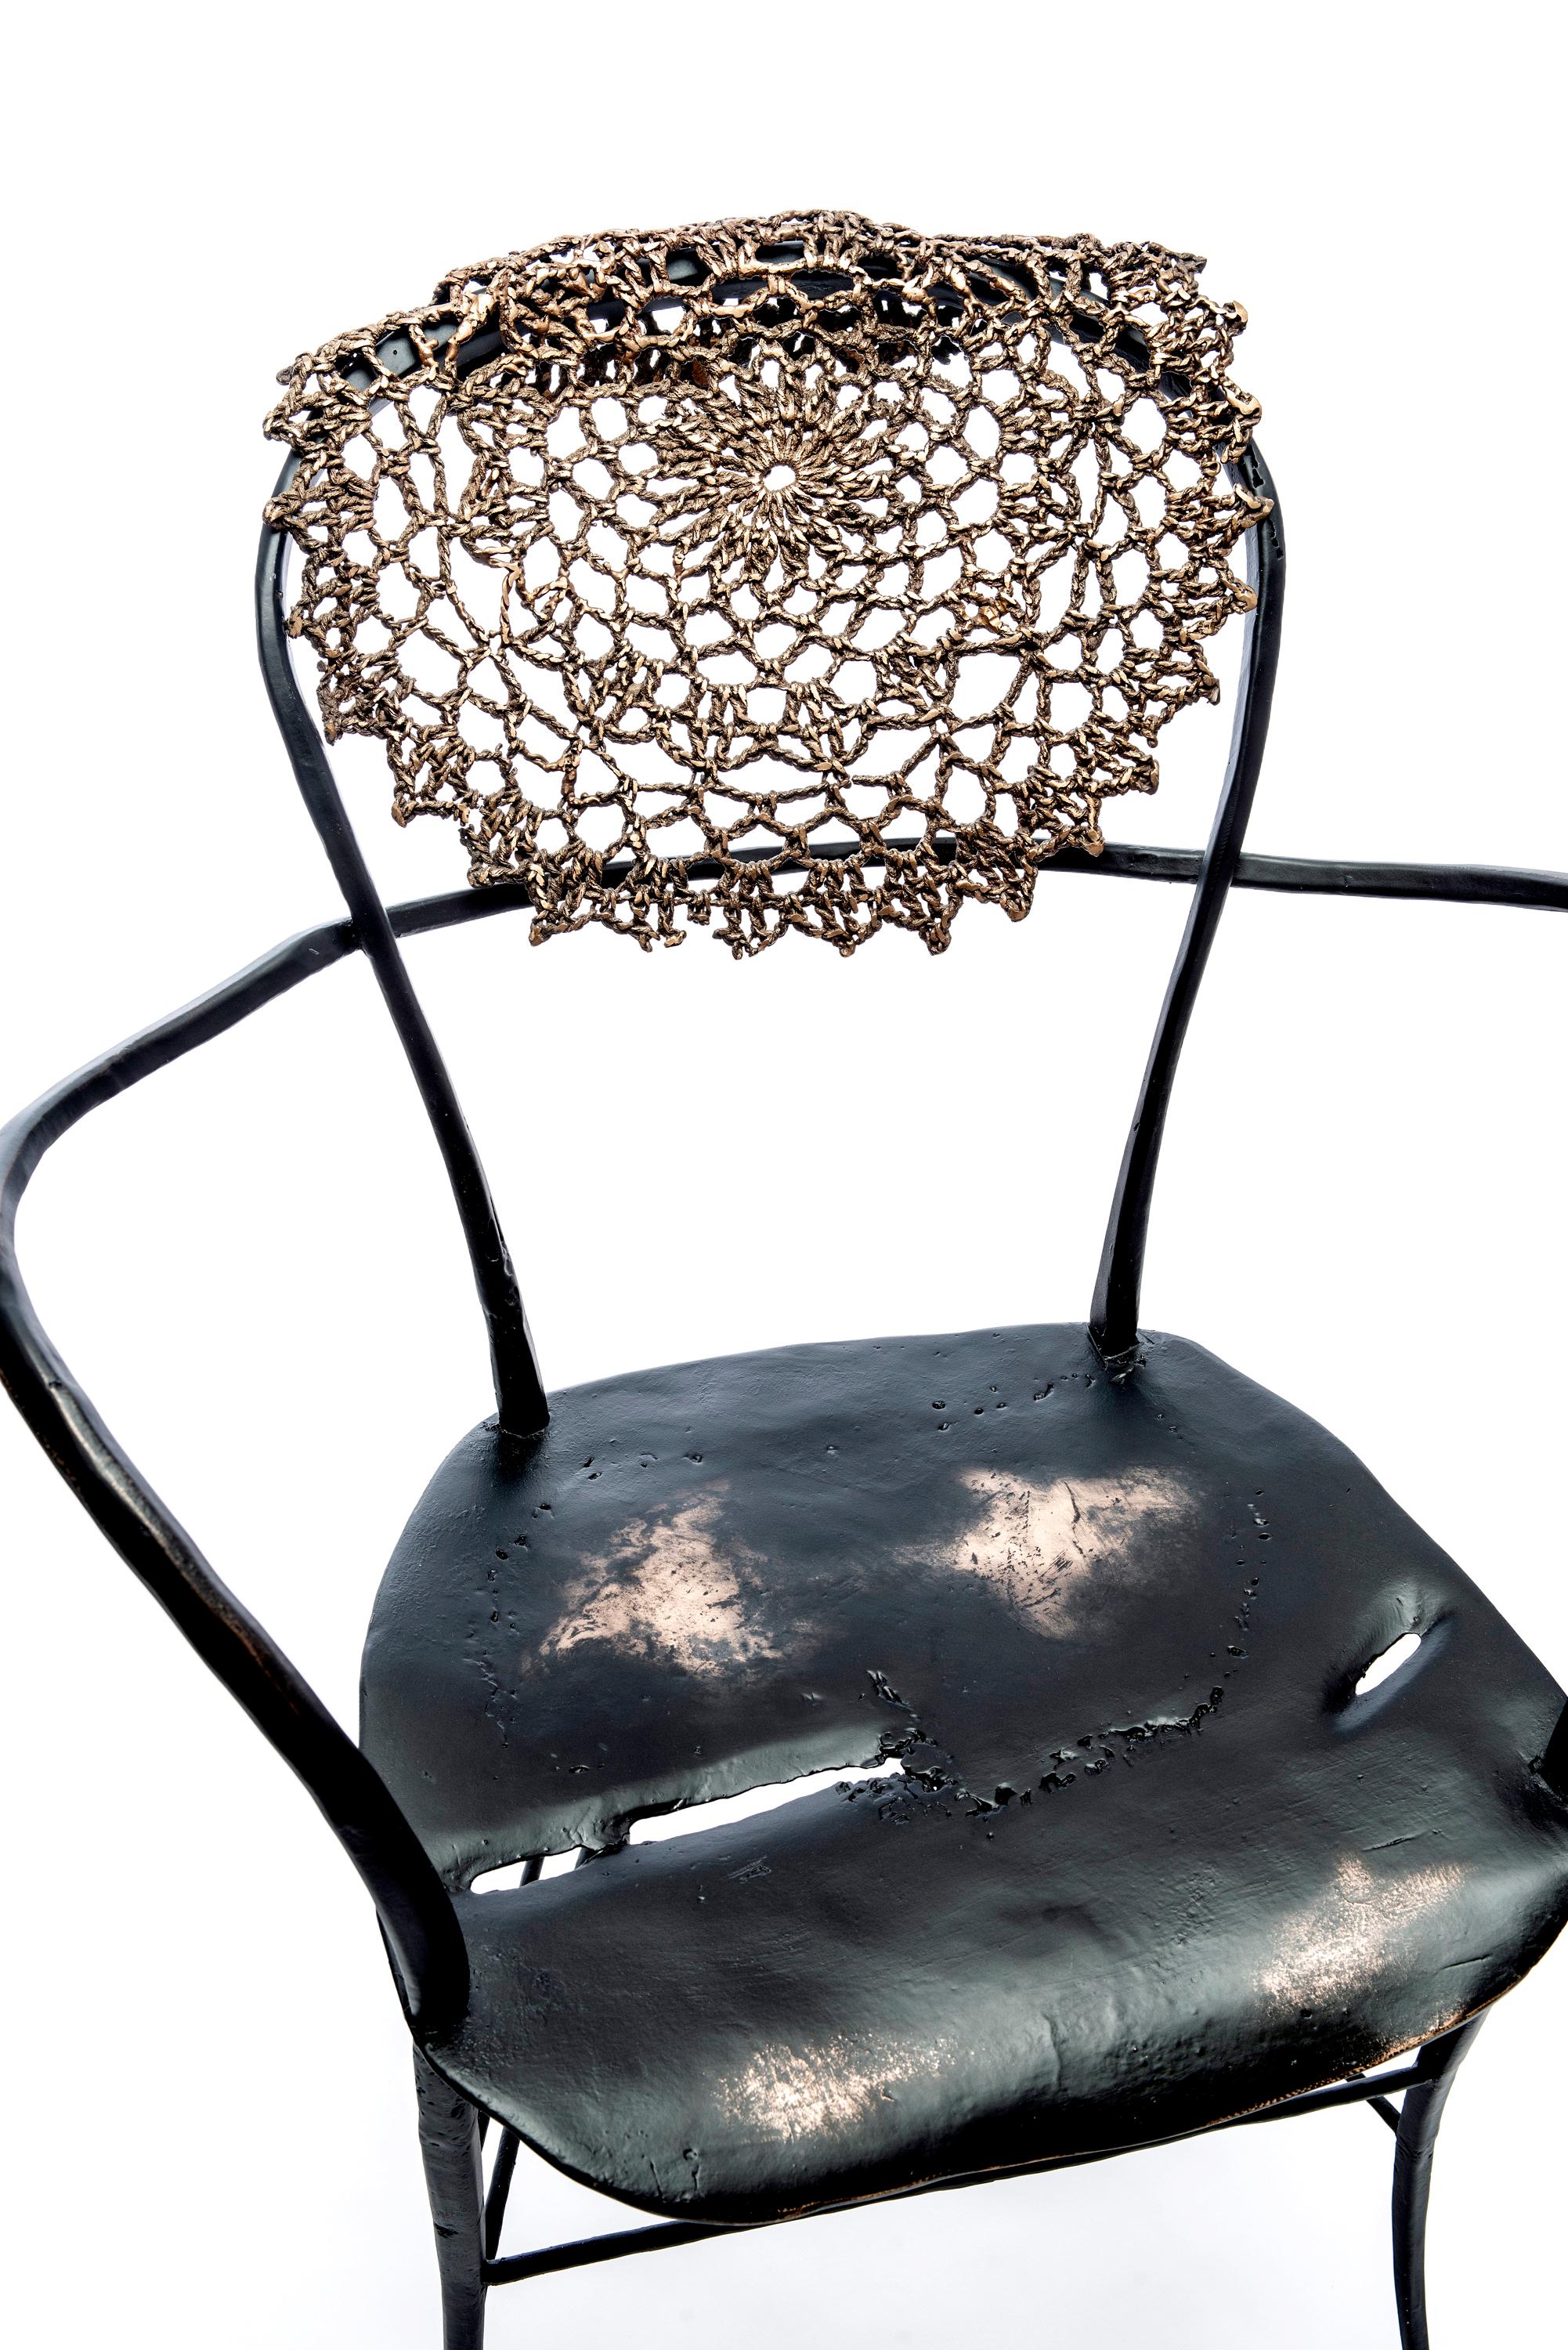 Ruben van Megen
Antimacassar III, 2018
Cast bronze, black patinated bronze combined with high-gloss polished bronze
33.5 x 22.5 x 22.5 in

Created by Ruben van Megen, this unique chair is inspired by and made out of antimacassar, a crocheted doily